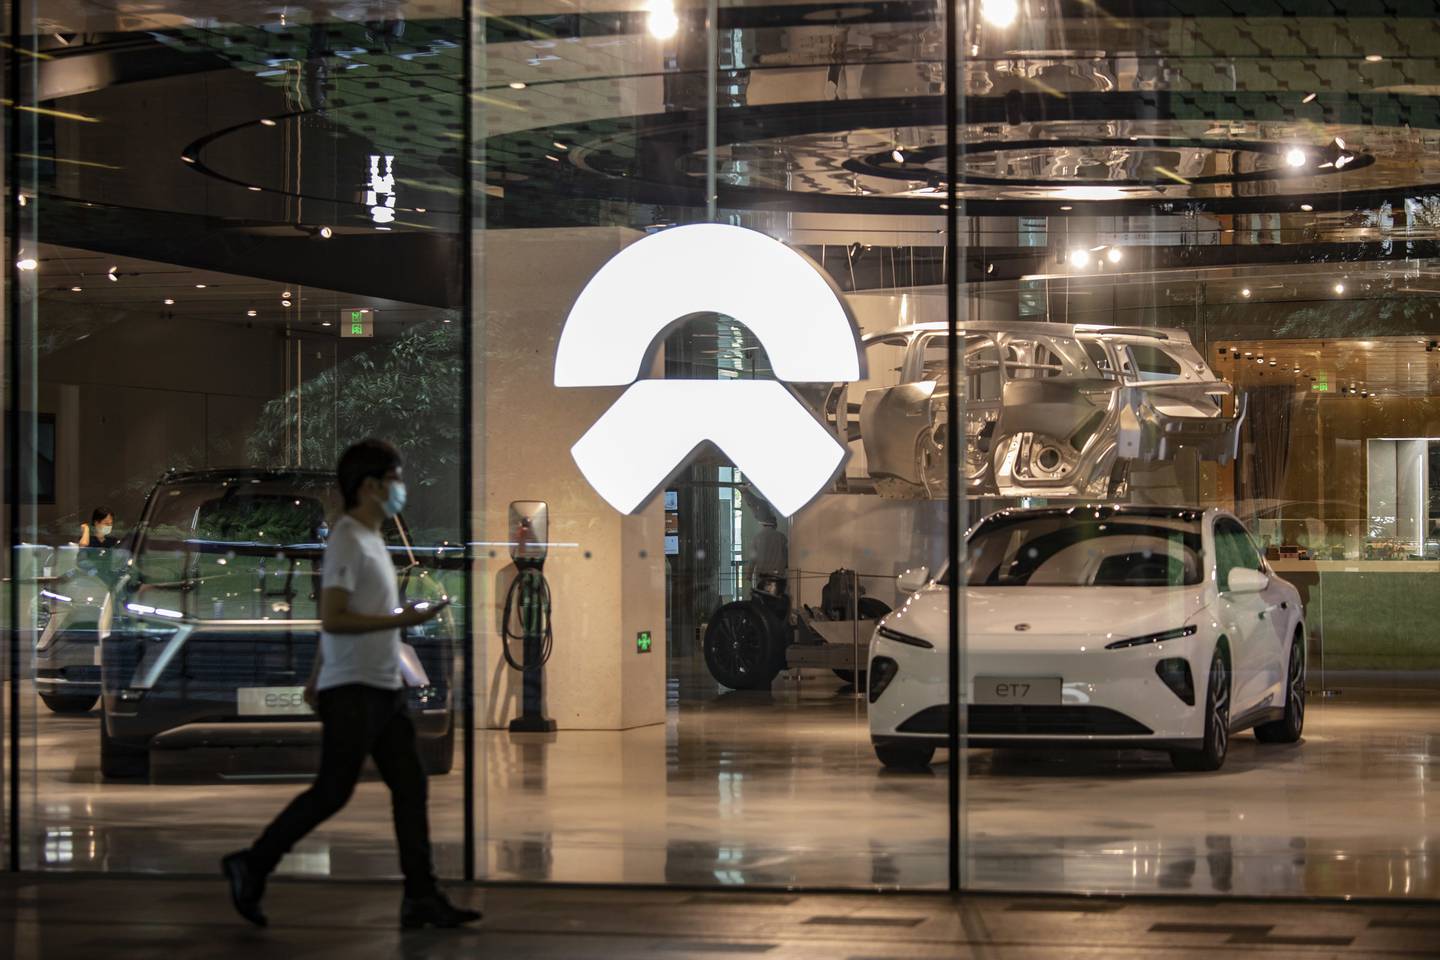 A Nio dealership in Shanghai, China. William Li, chief executive of Nio, said it could take until May for China's EV market to begin to recover. Bloomberg